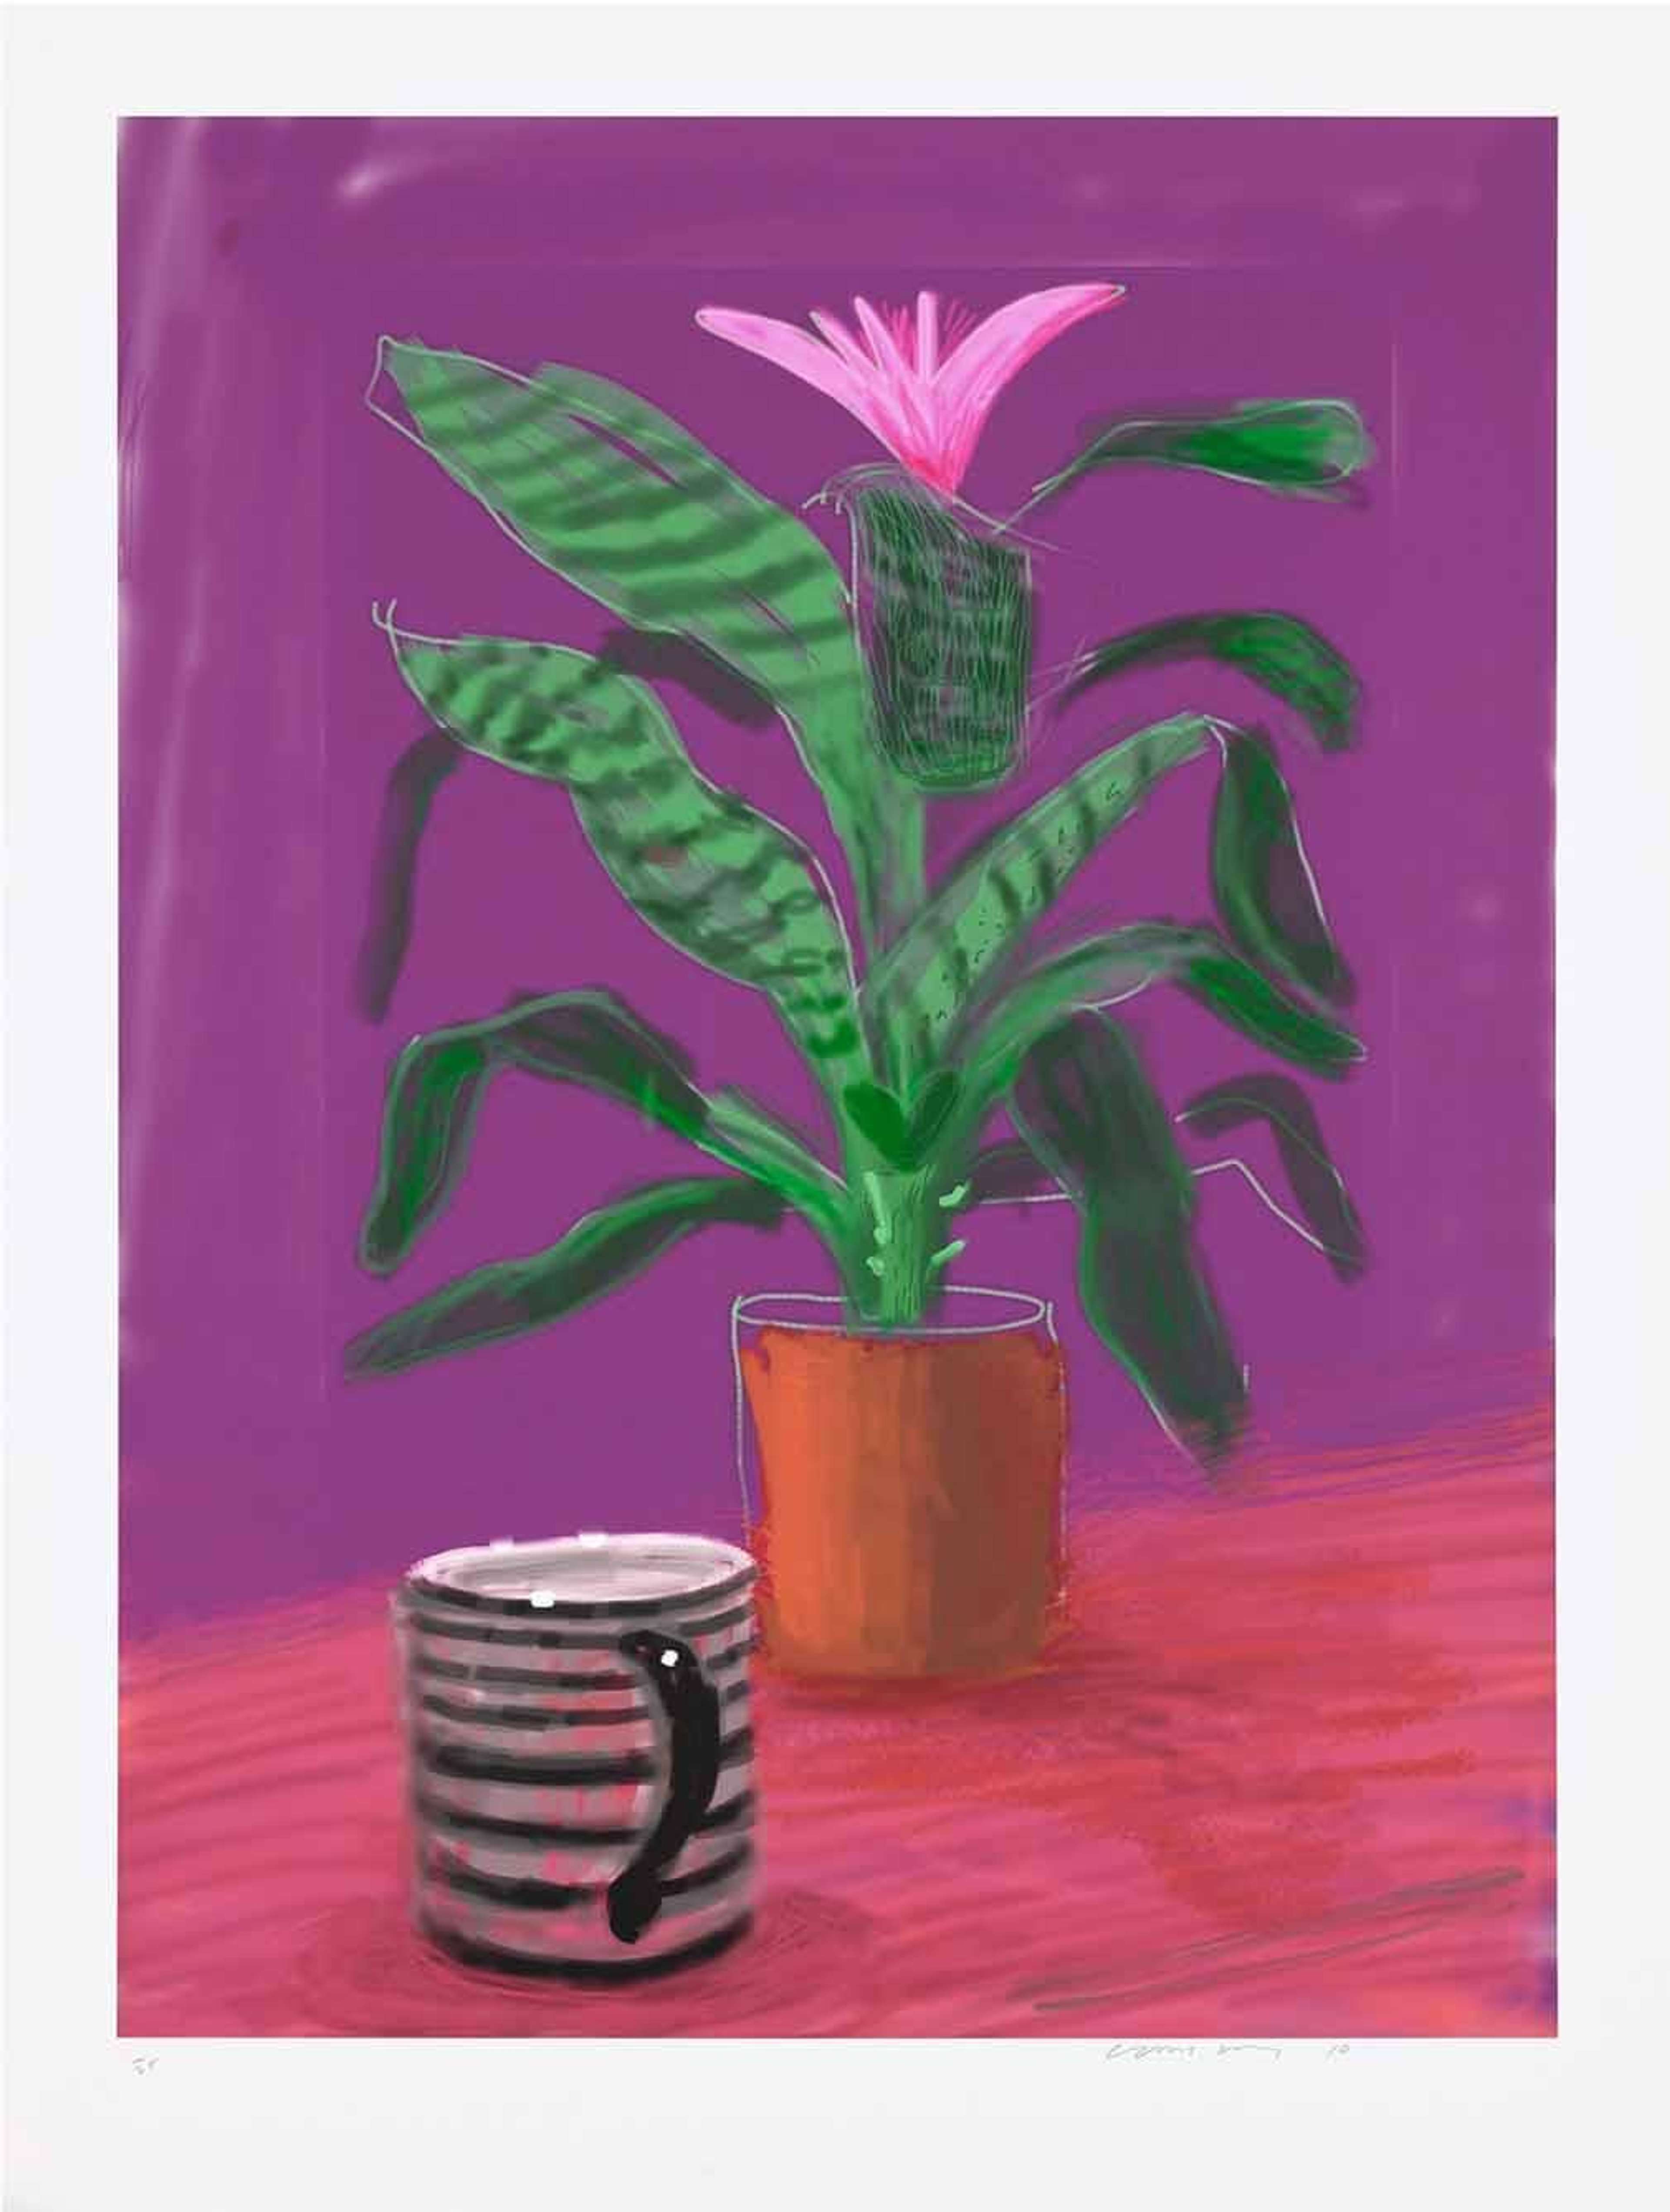 David Hockney’s Untitled No. 224. A digital print of a black and white striped coffee mug in front of a plant with a blooming pink flower.